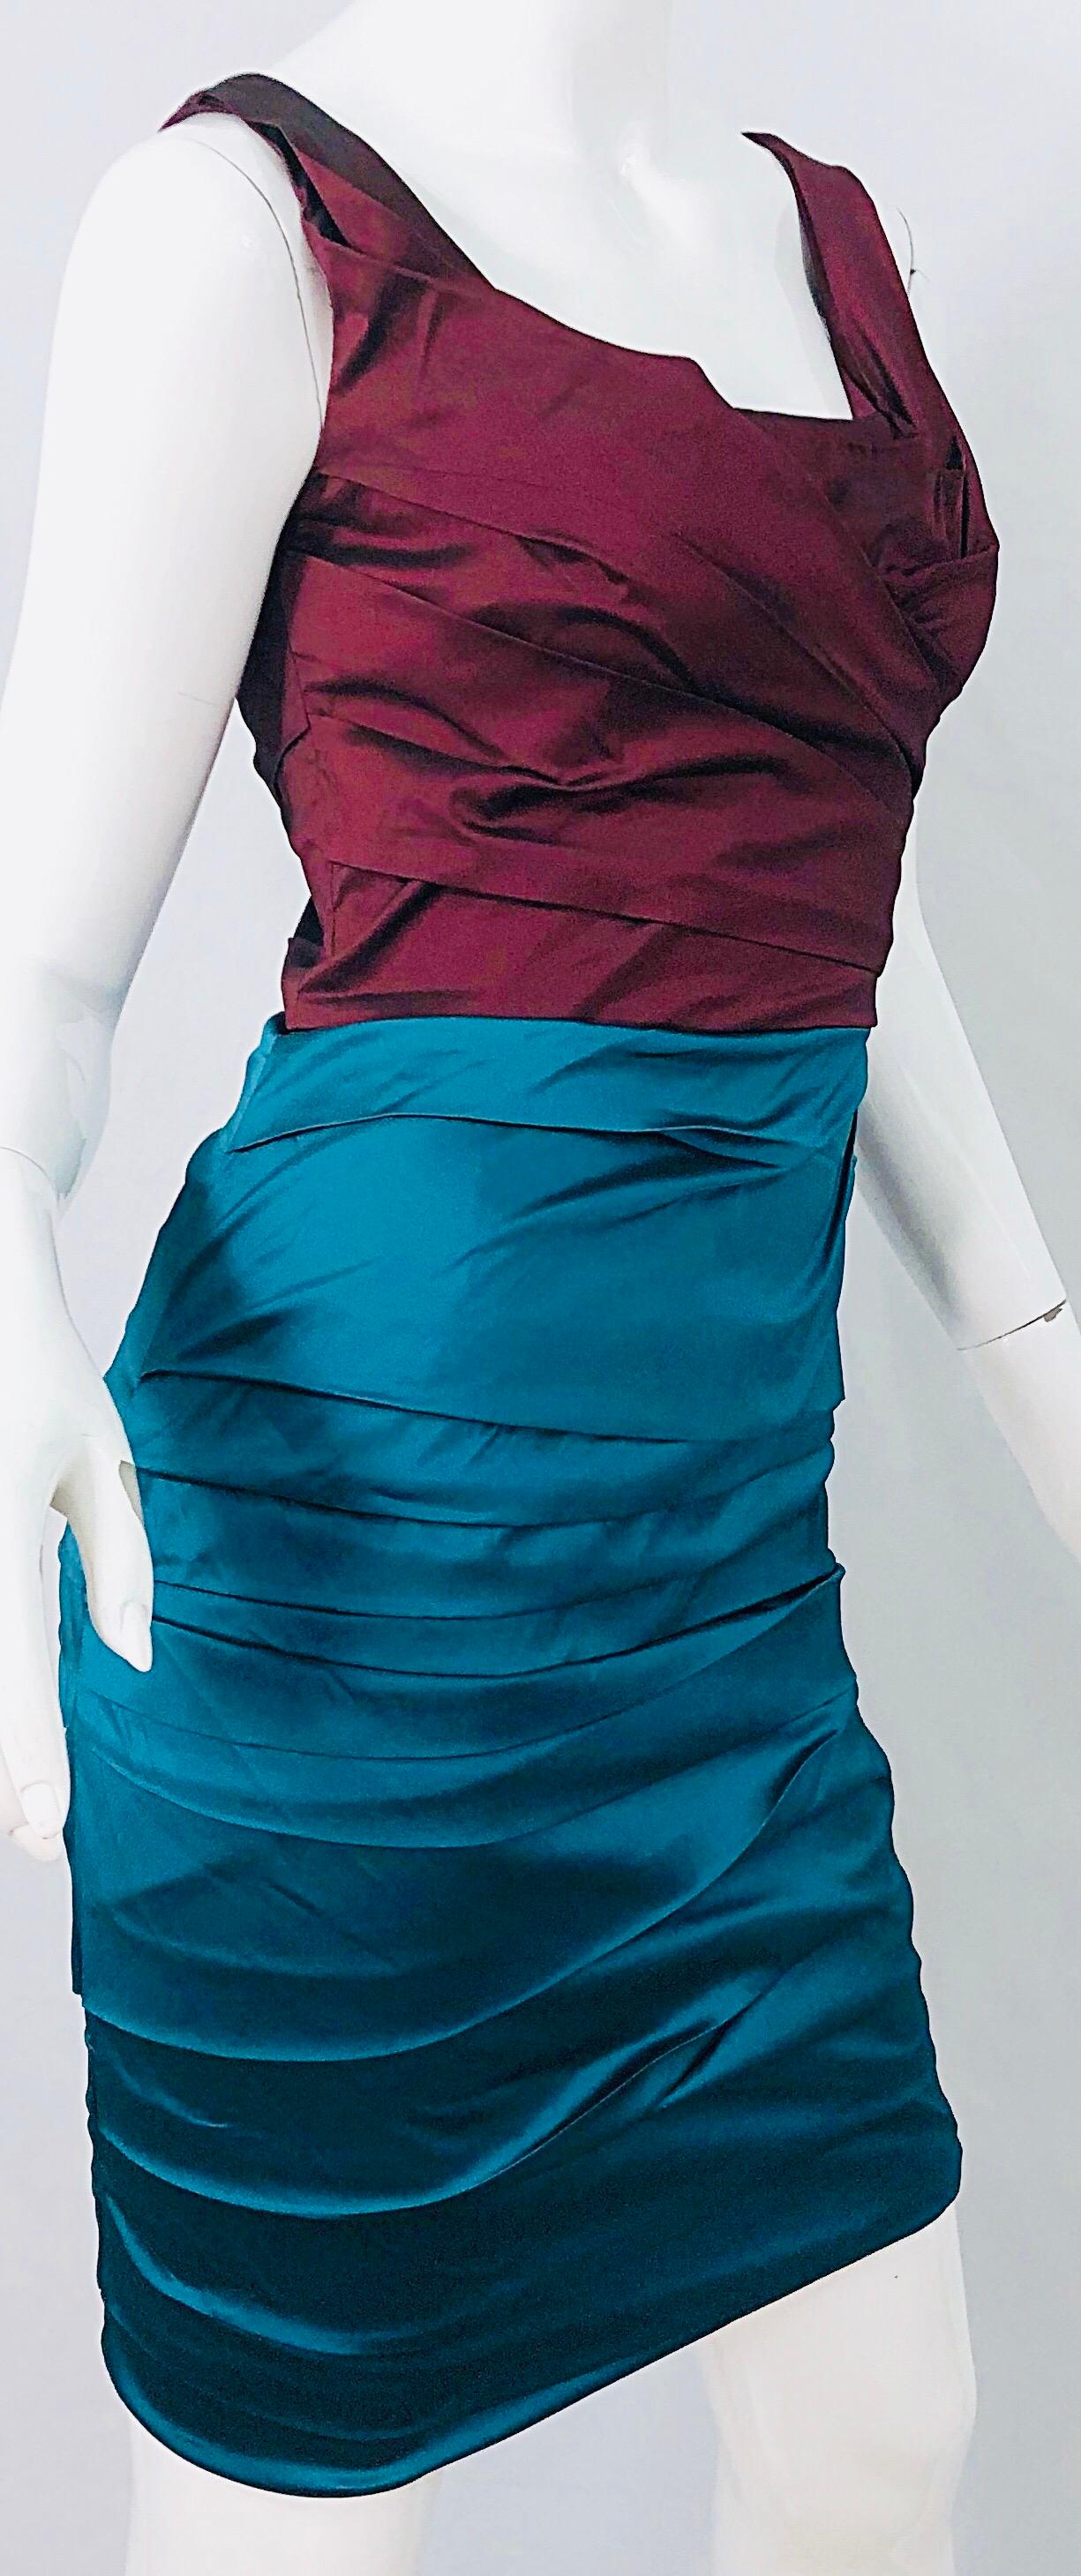 Women's NWT Dolce and Gabbana 1990s Burgundy Turquoise Blue Colorblock Vintage Dress